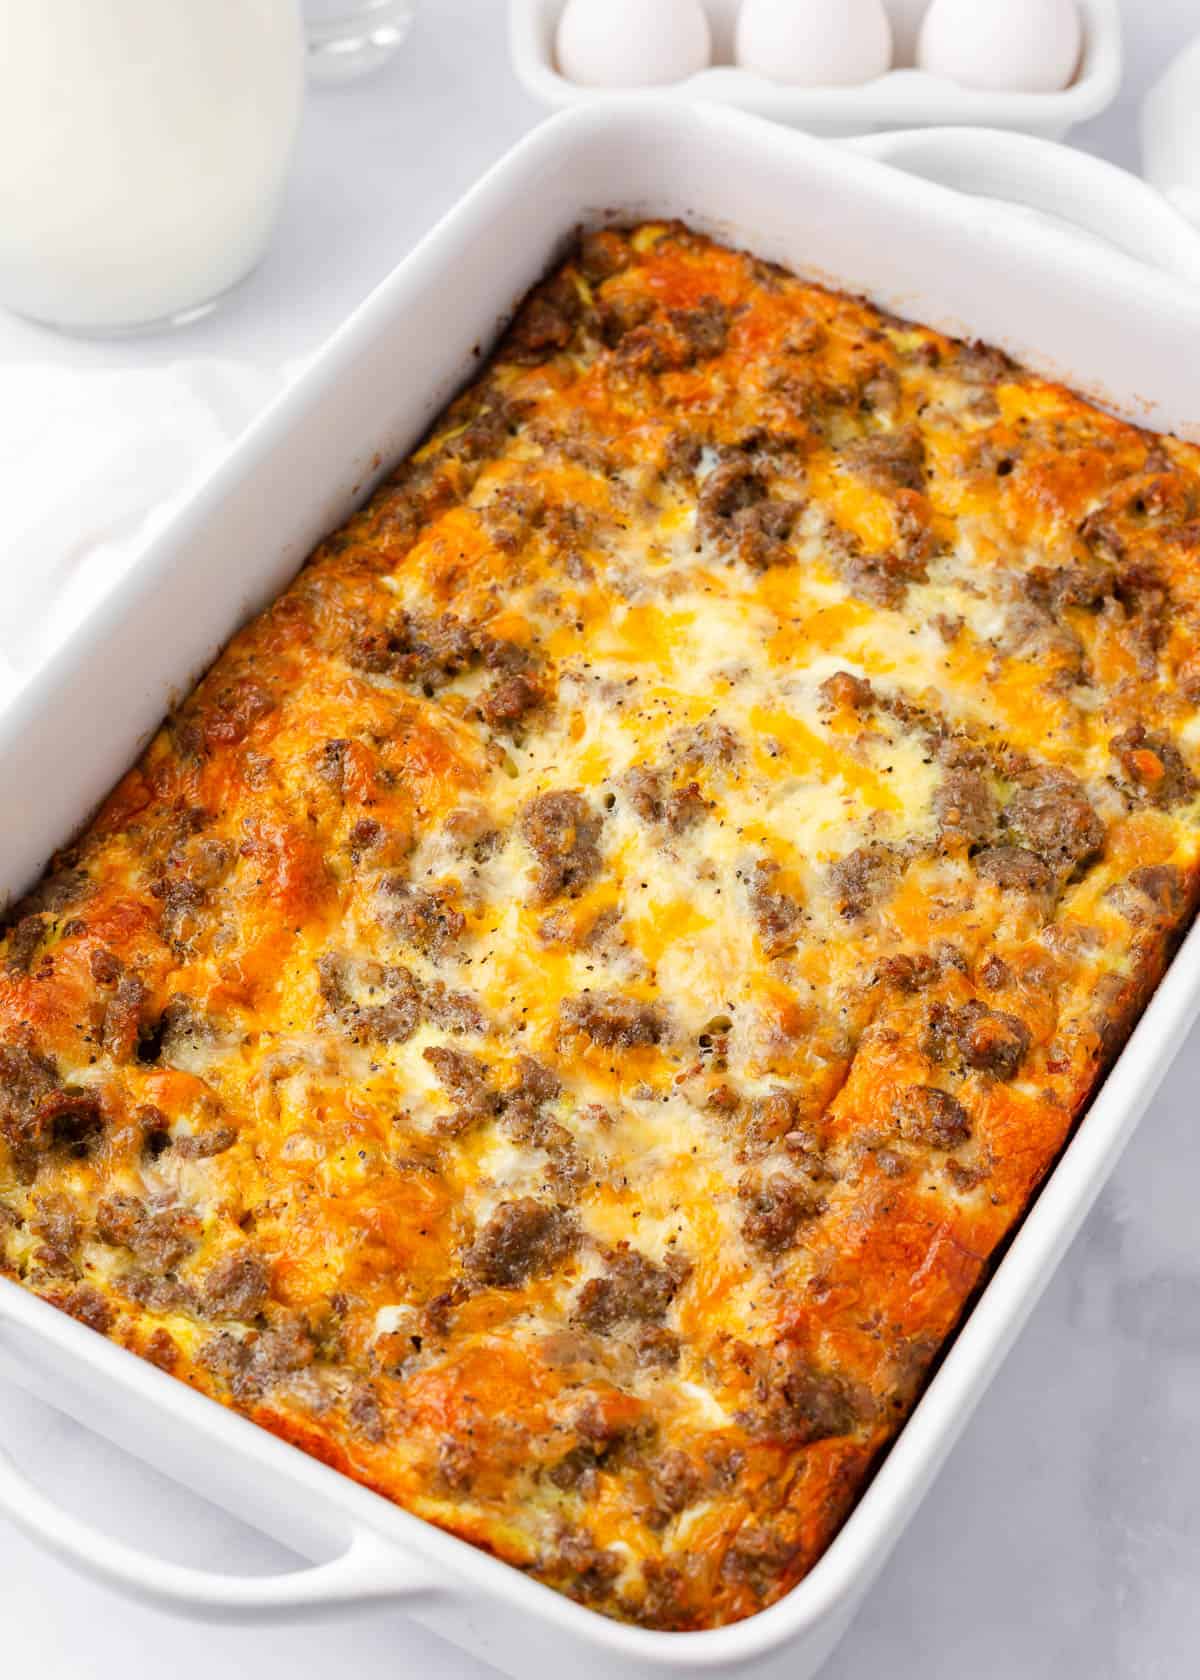 Sausage crescent roll breakfast casserole baked in white baking dish.